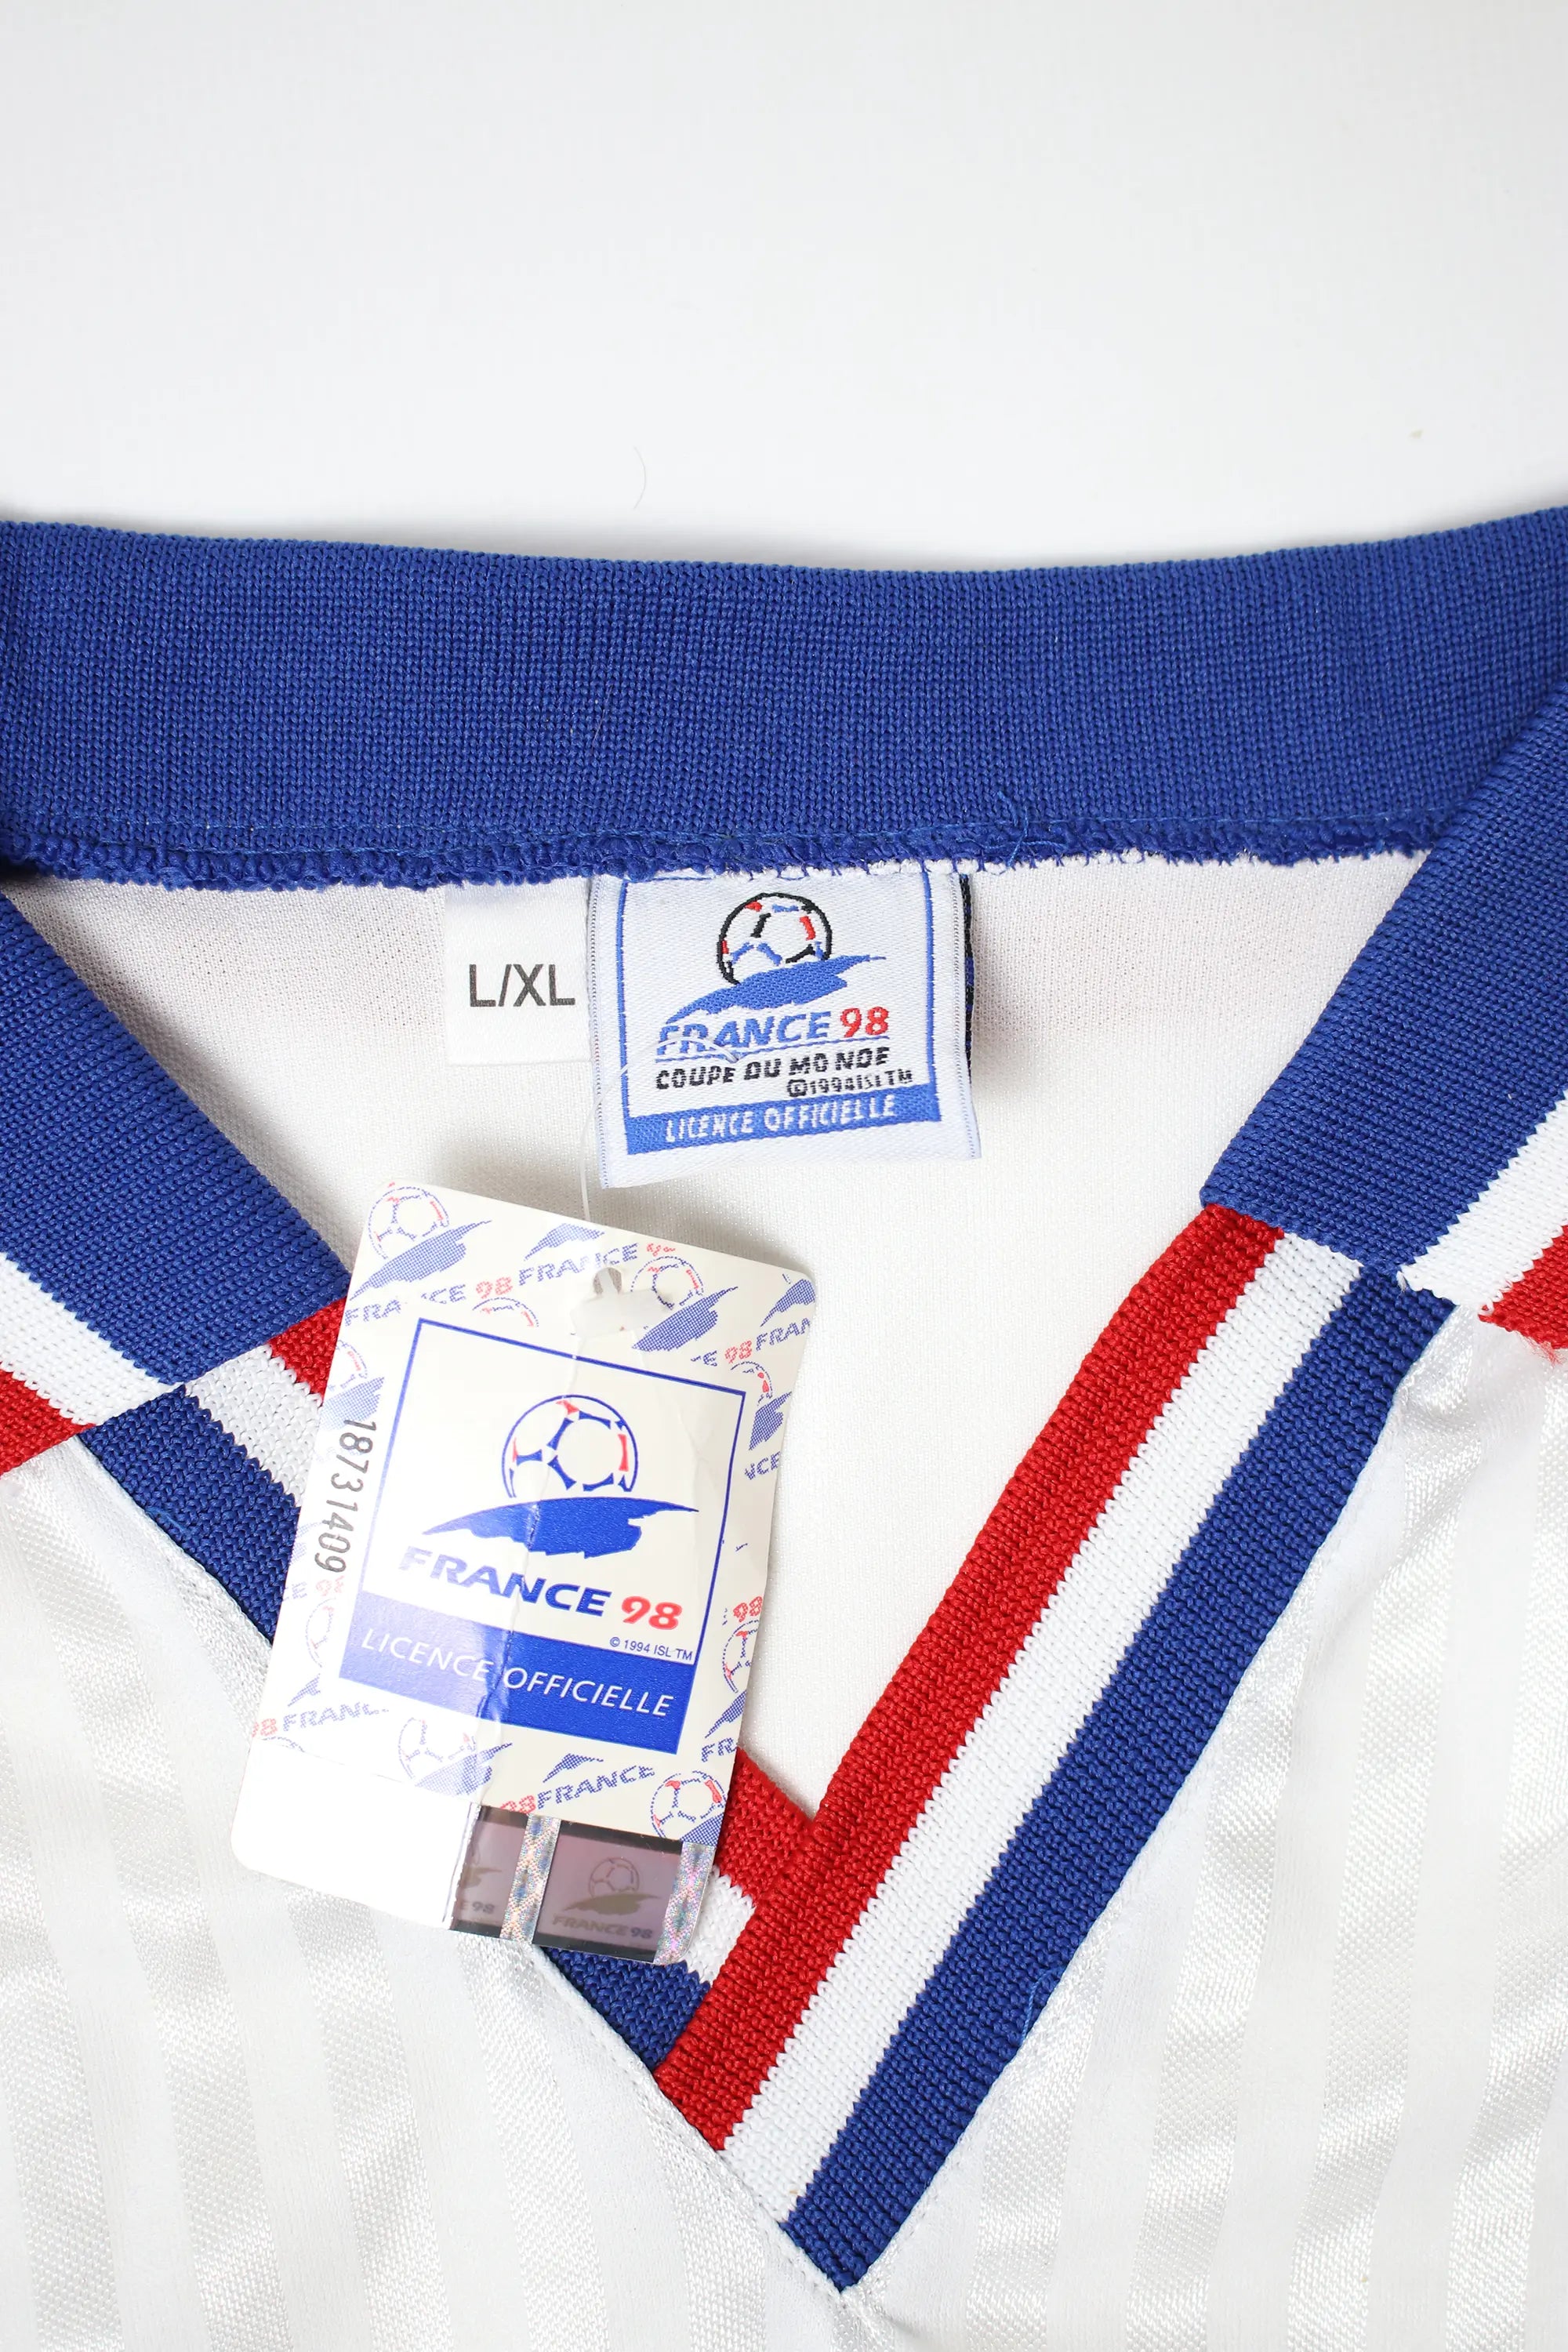 France '98 Jersey DSWT